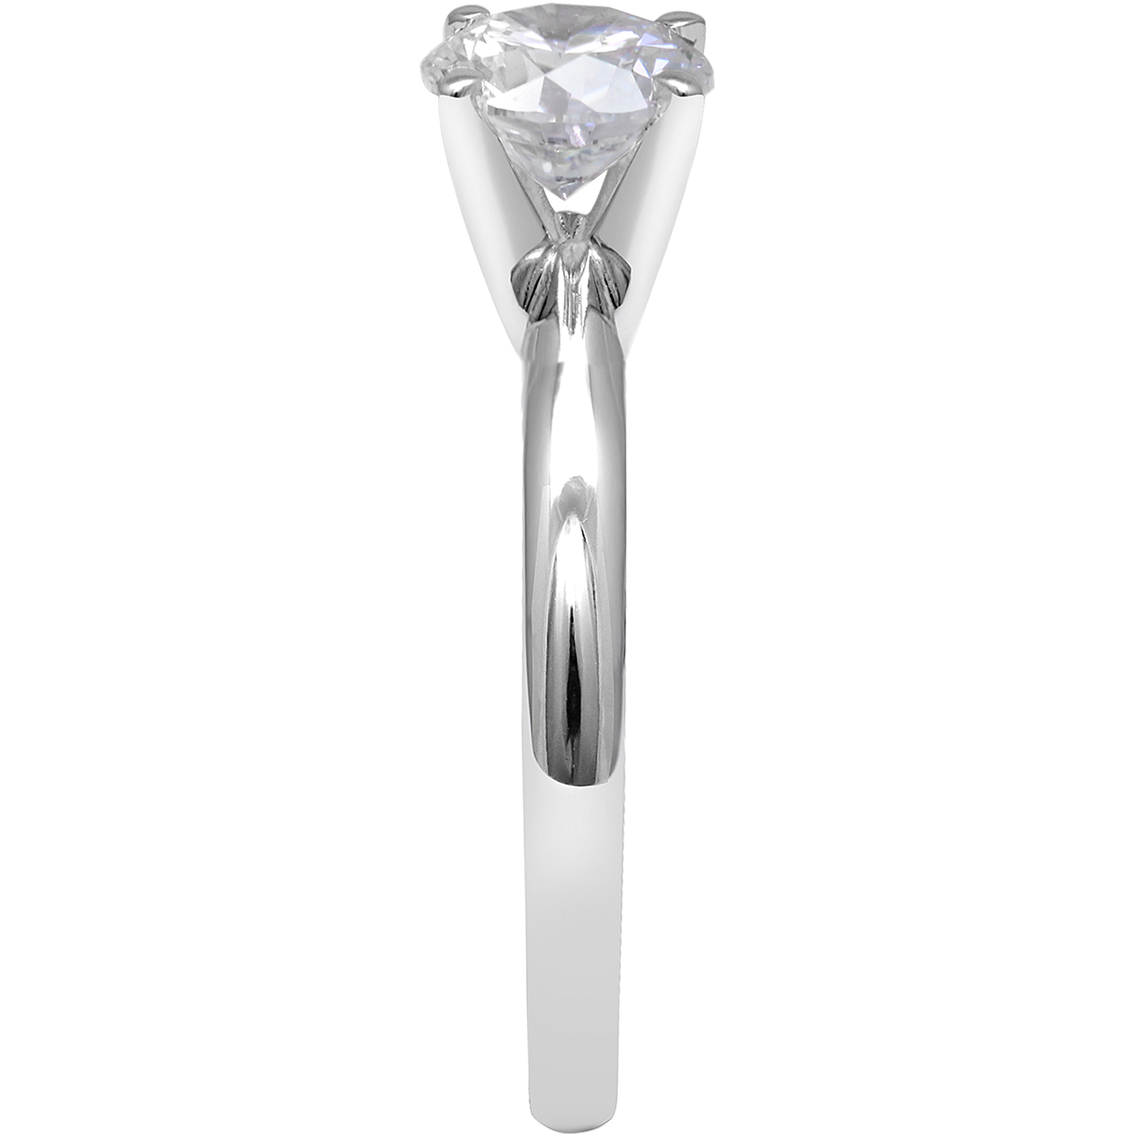 Ray of Brilliance 14K White Gold 1 ct. Lab Grown Round Diamond Solitaire Ring - Image 3 of 4